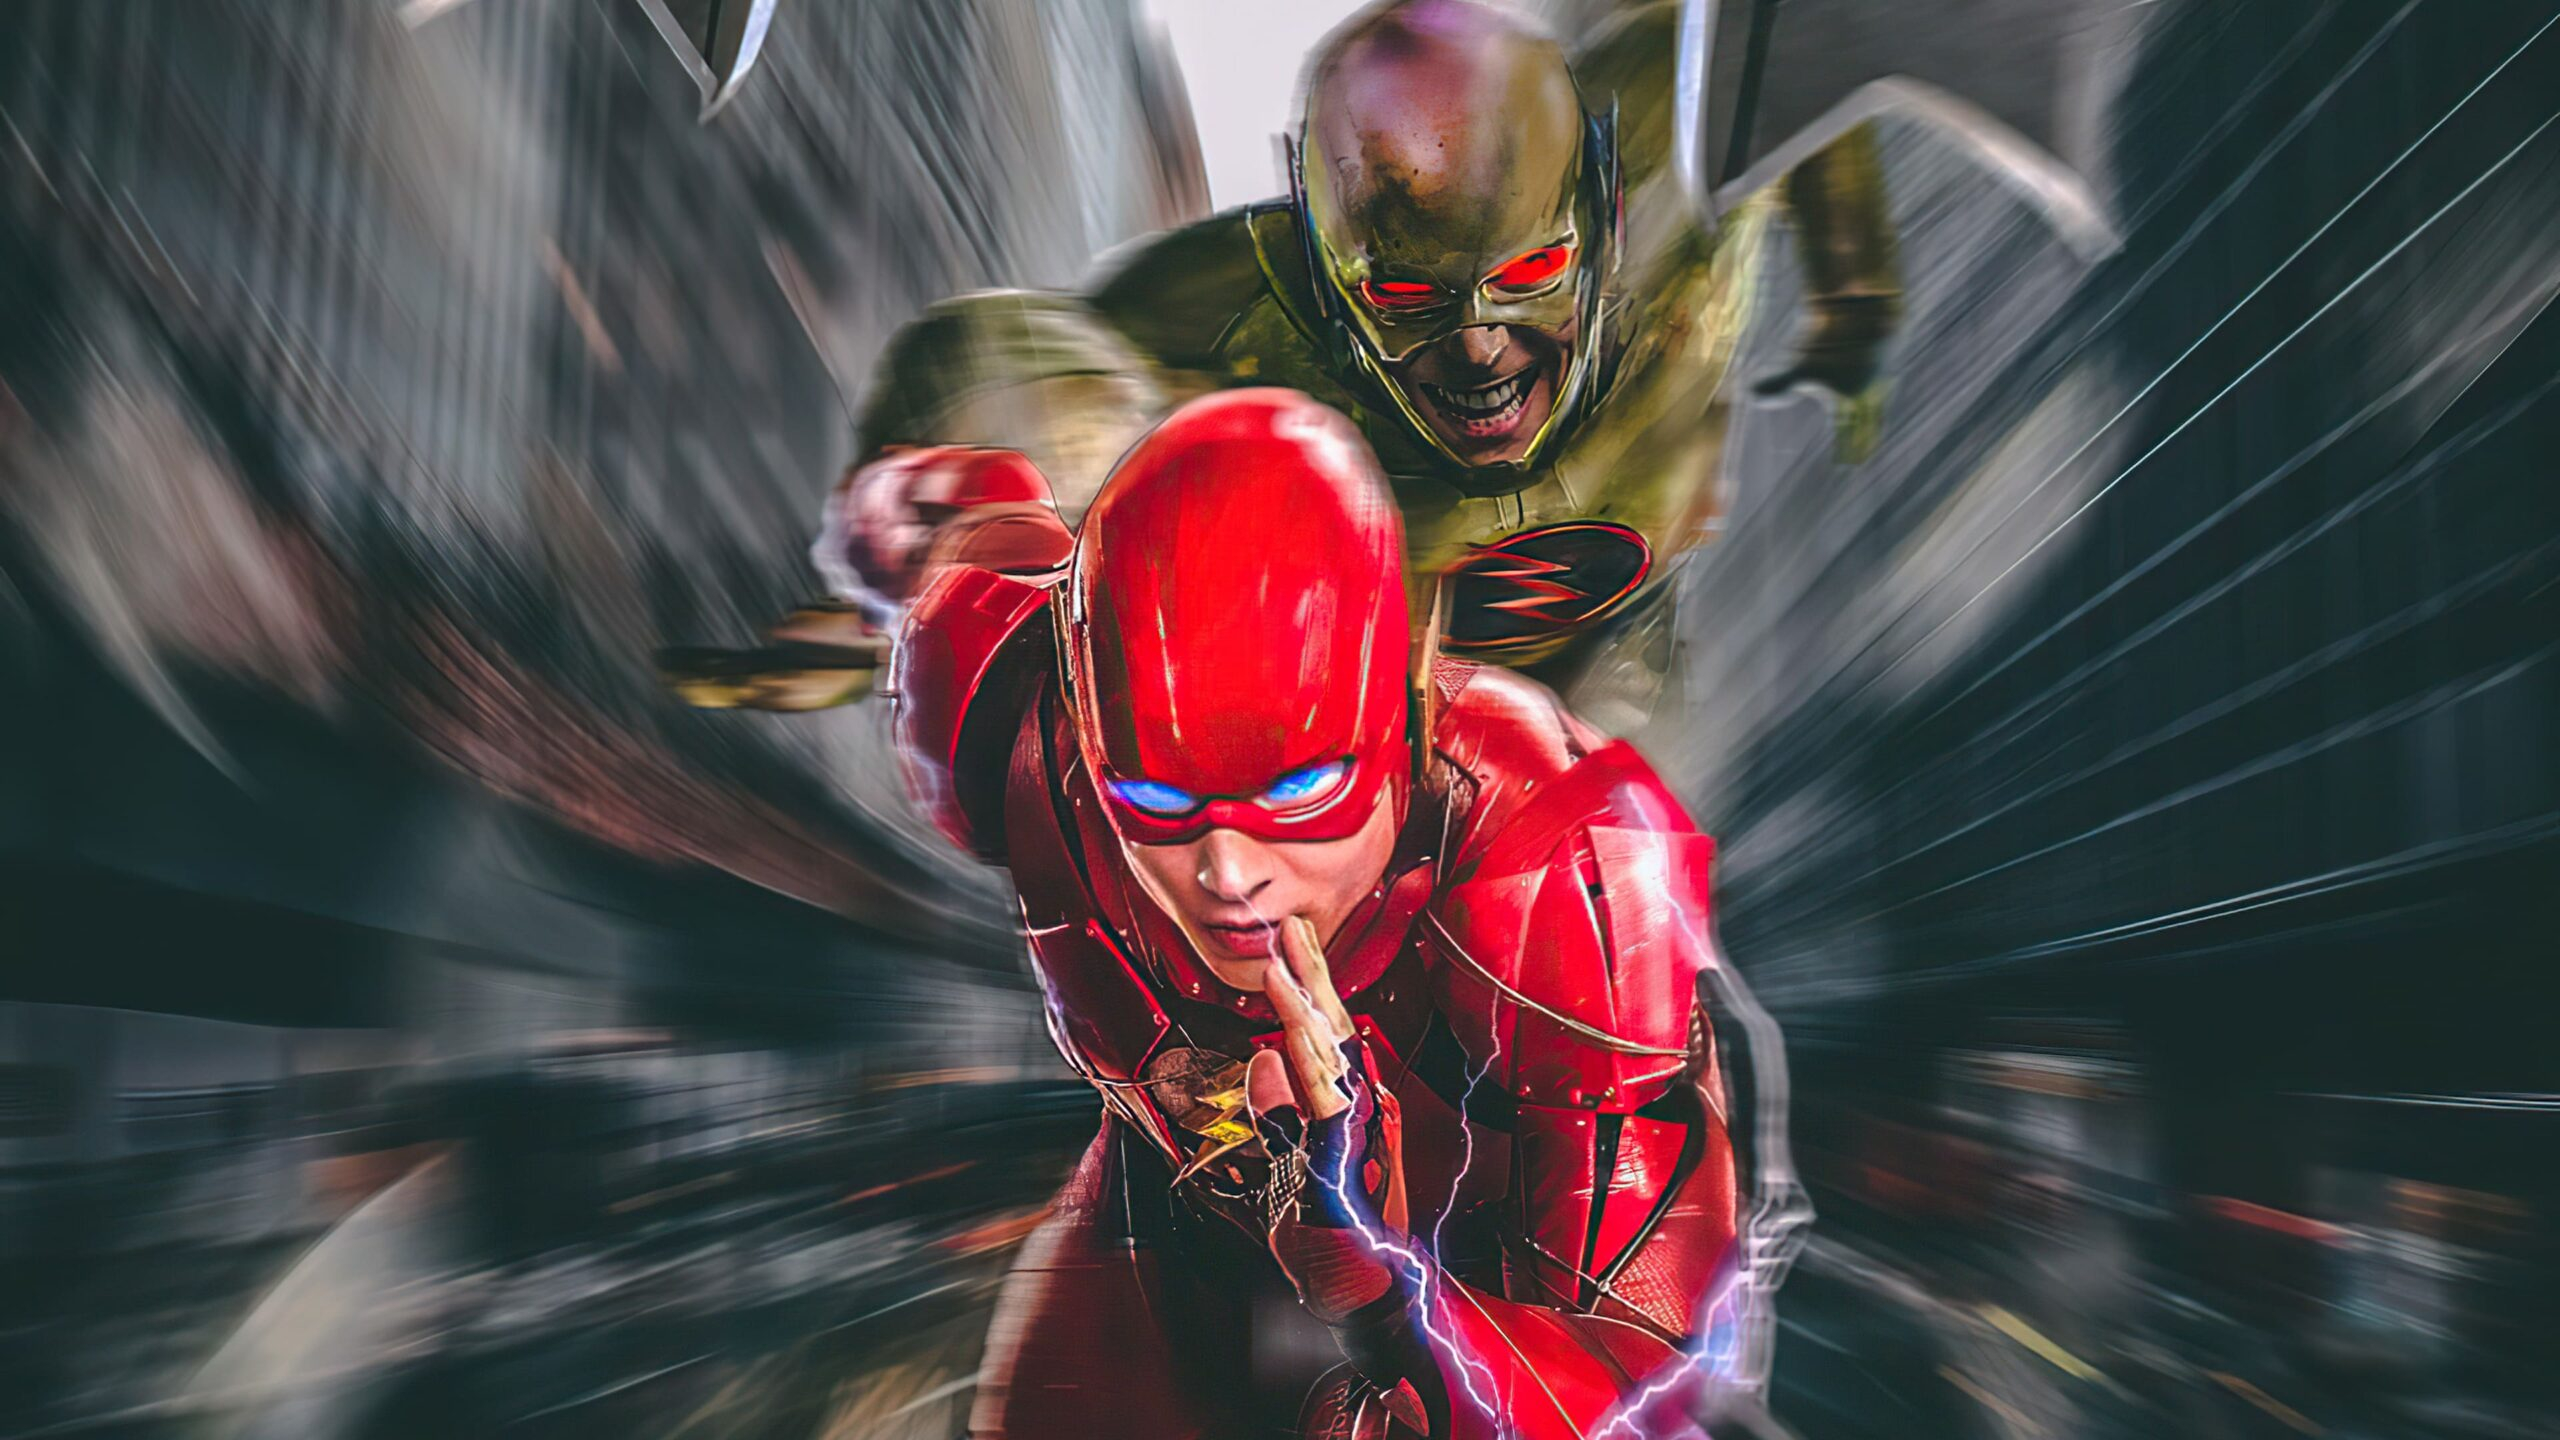 2560x1440 The Flash Wallpapers Top Best The Flash Wallpapers Download [ HD